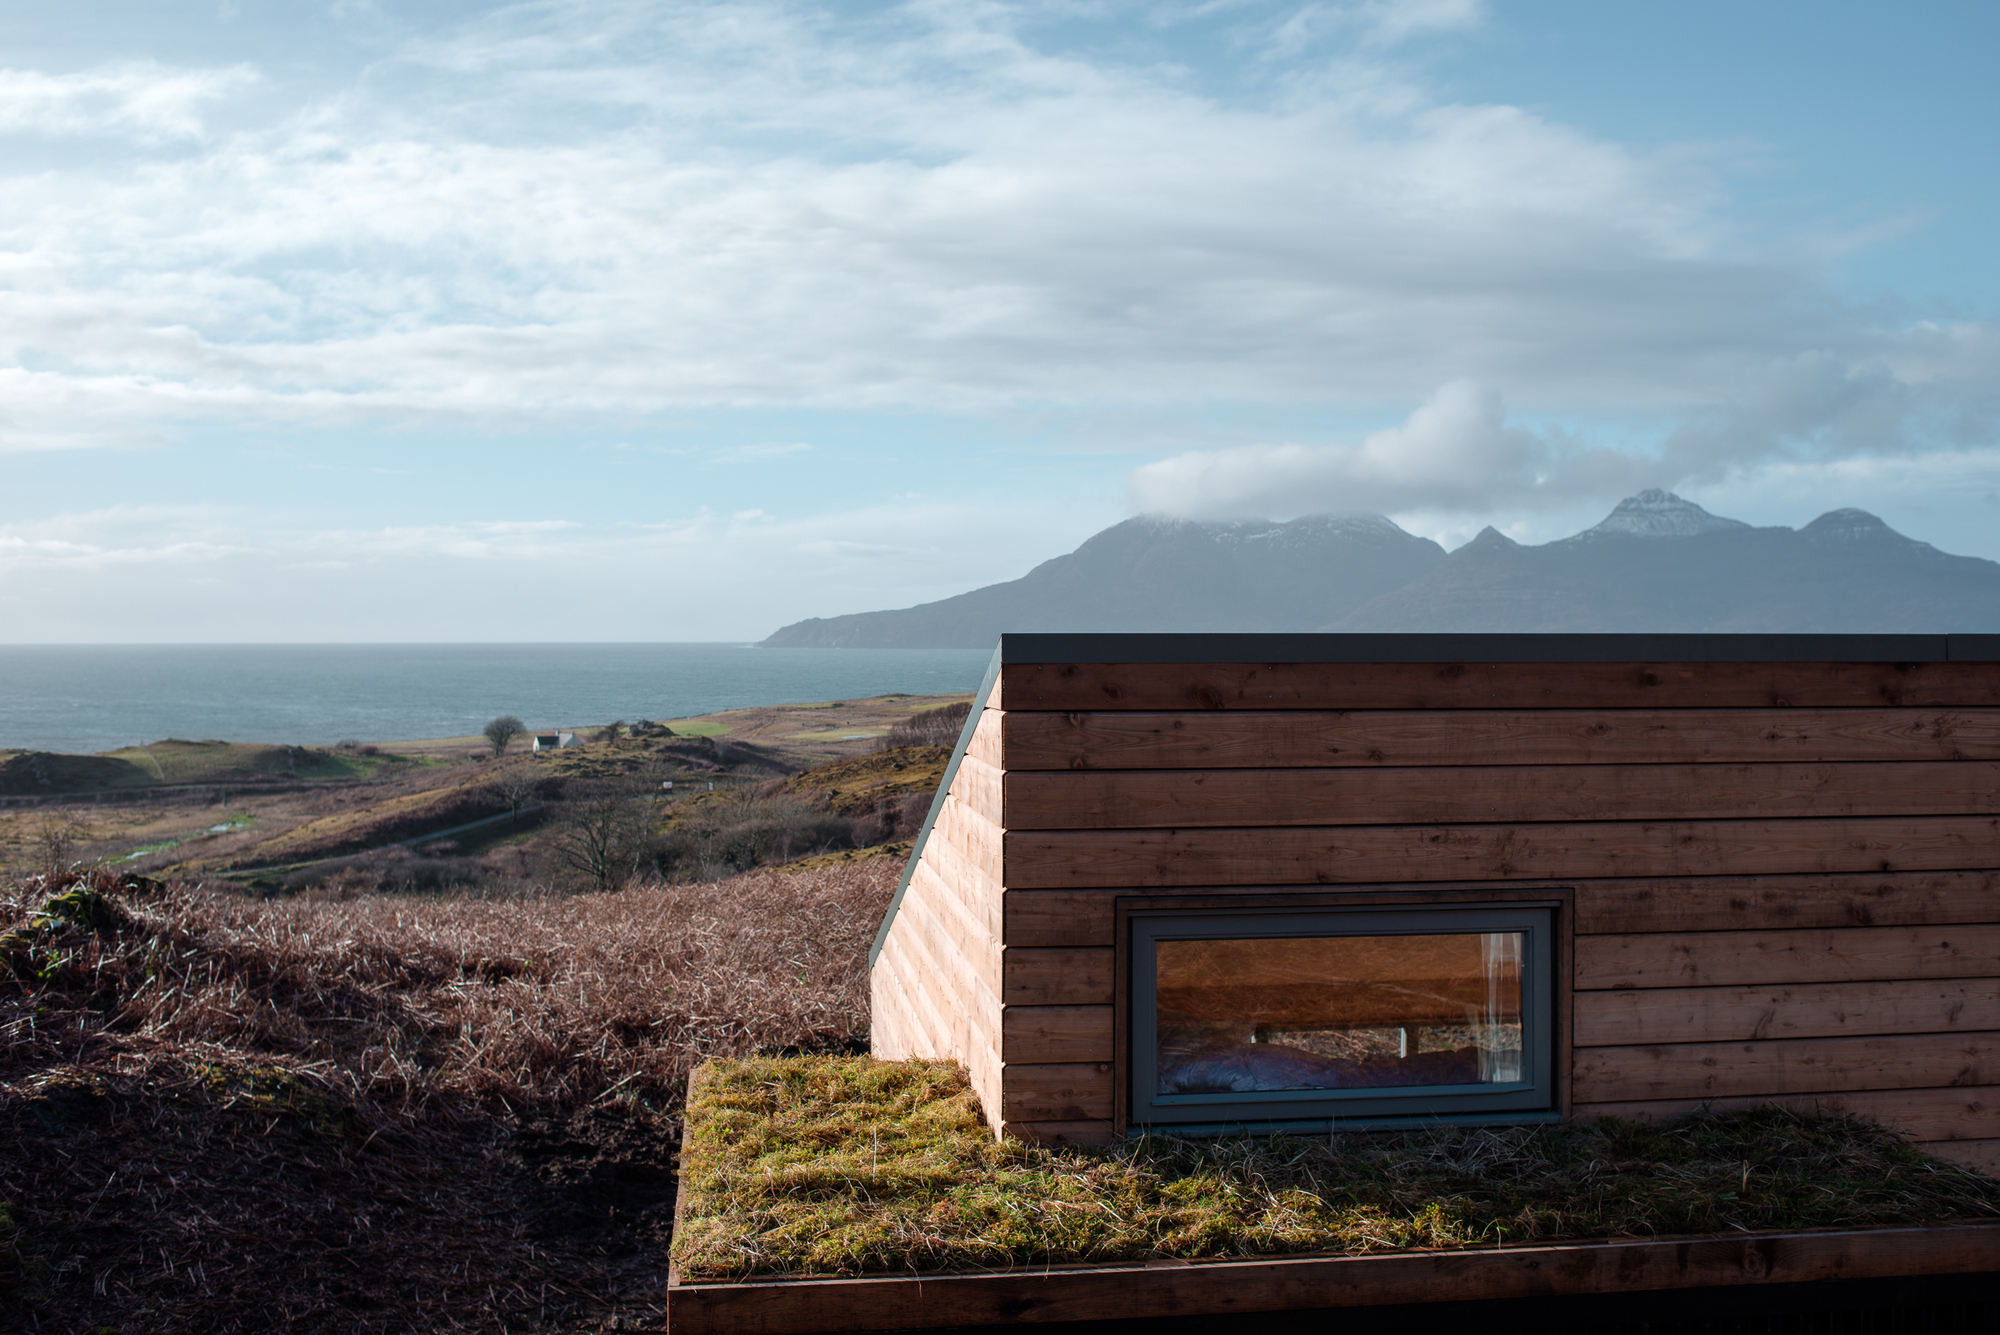 544b315fe58eceb56700030a_a-shed-of-one-s-own-an-exploration-of-architectural-sheds-and-writer-s-bothies_image_01_sweeney-s_bothy.jpg